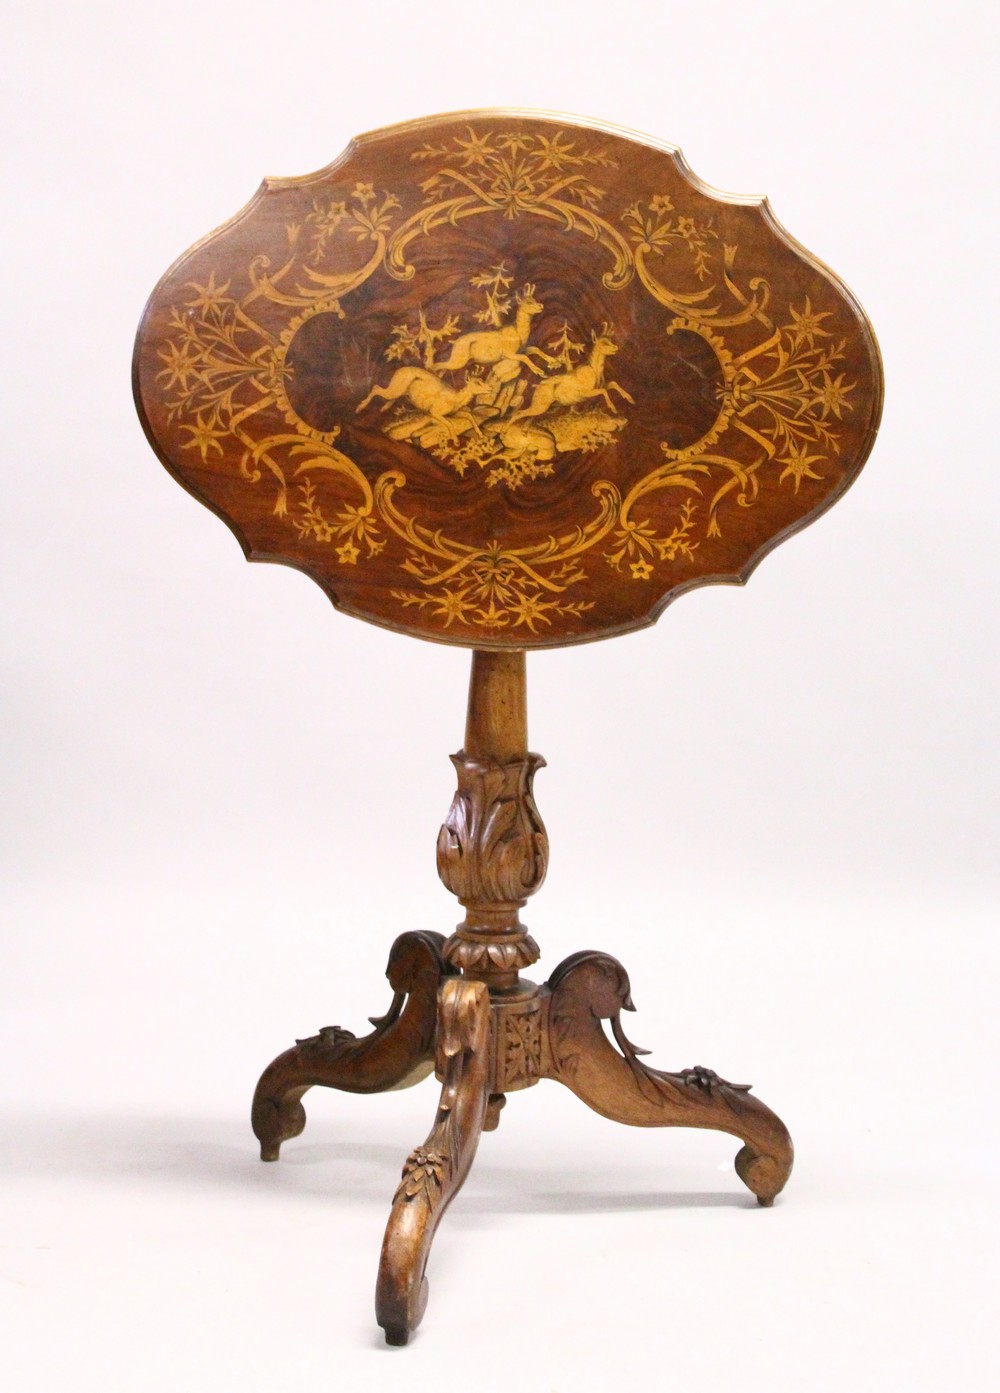 A "BLACK FOREST" WALNUT AND MARQUETRY TRIPOD TABLE, the shaped top inlaid with a scene of mountain